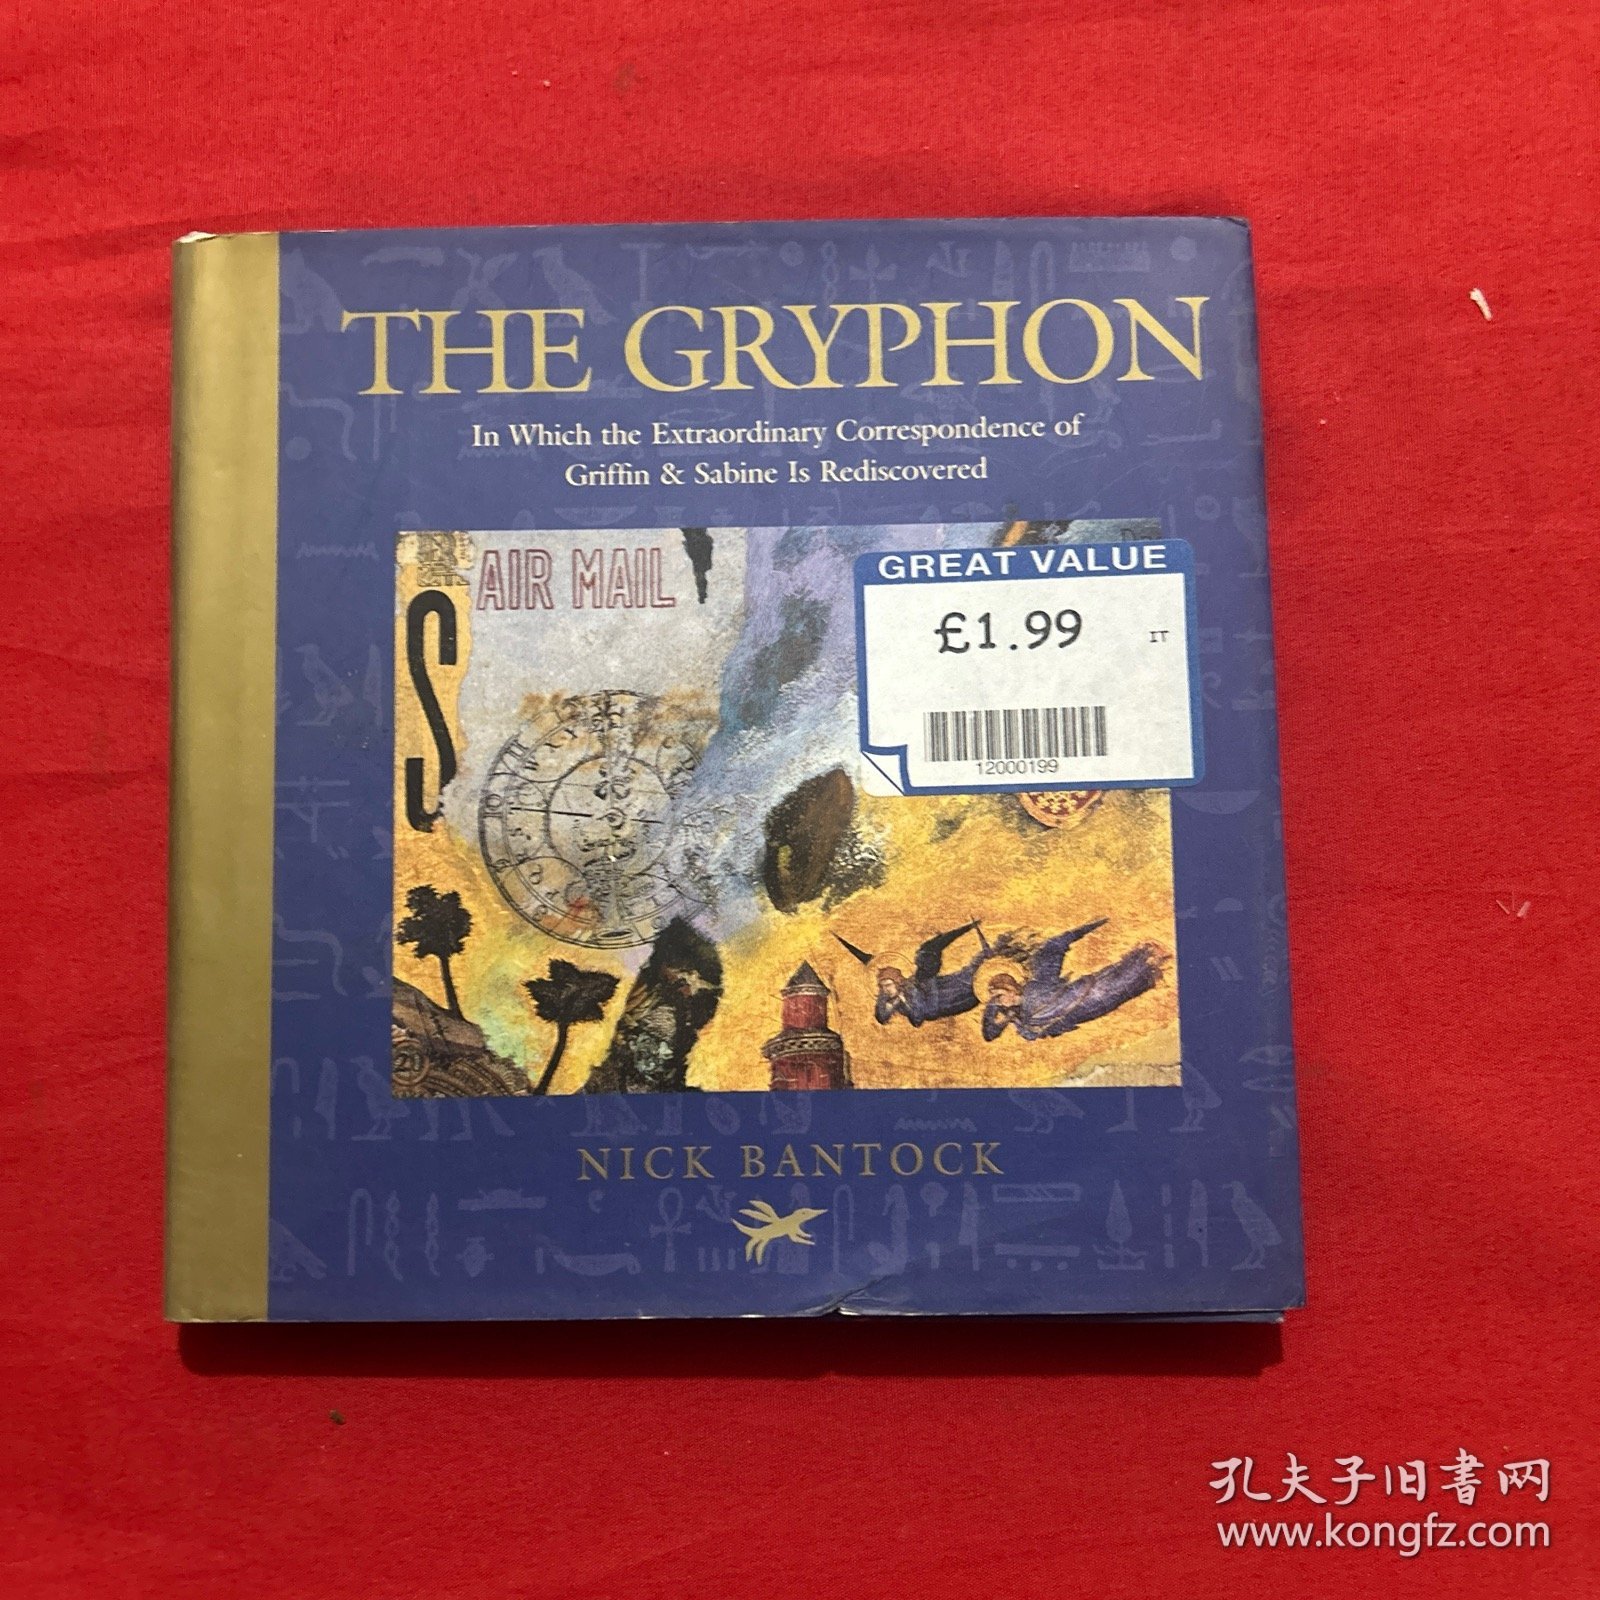 THE GRYPHON In Which the Extraordinary correspondence of Griffin & Sabine Is Rediscovered